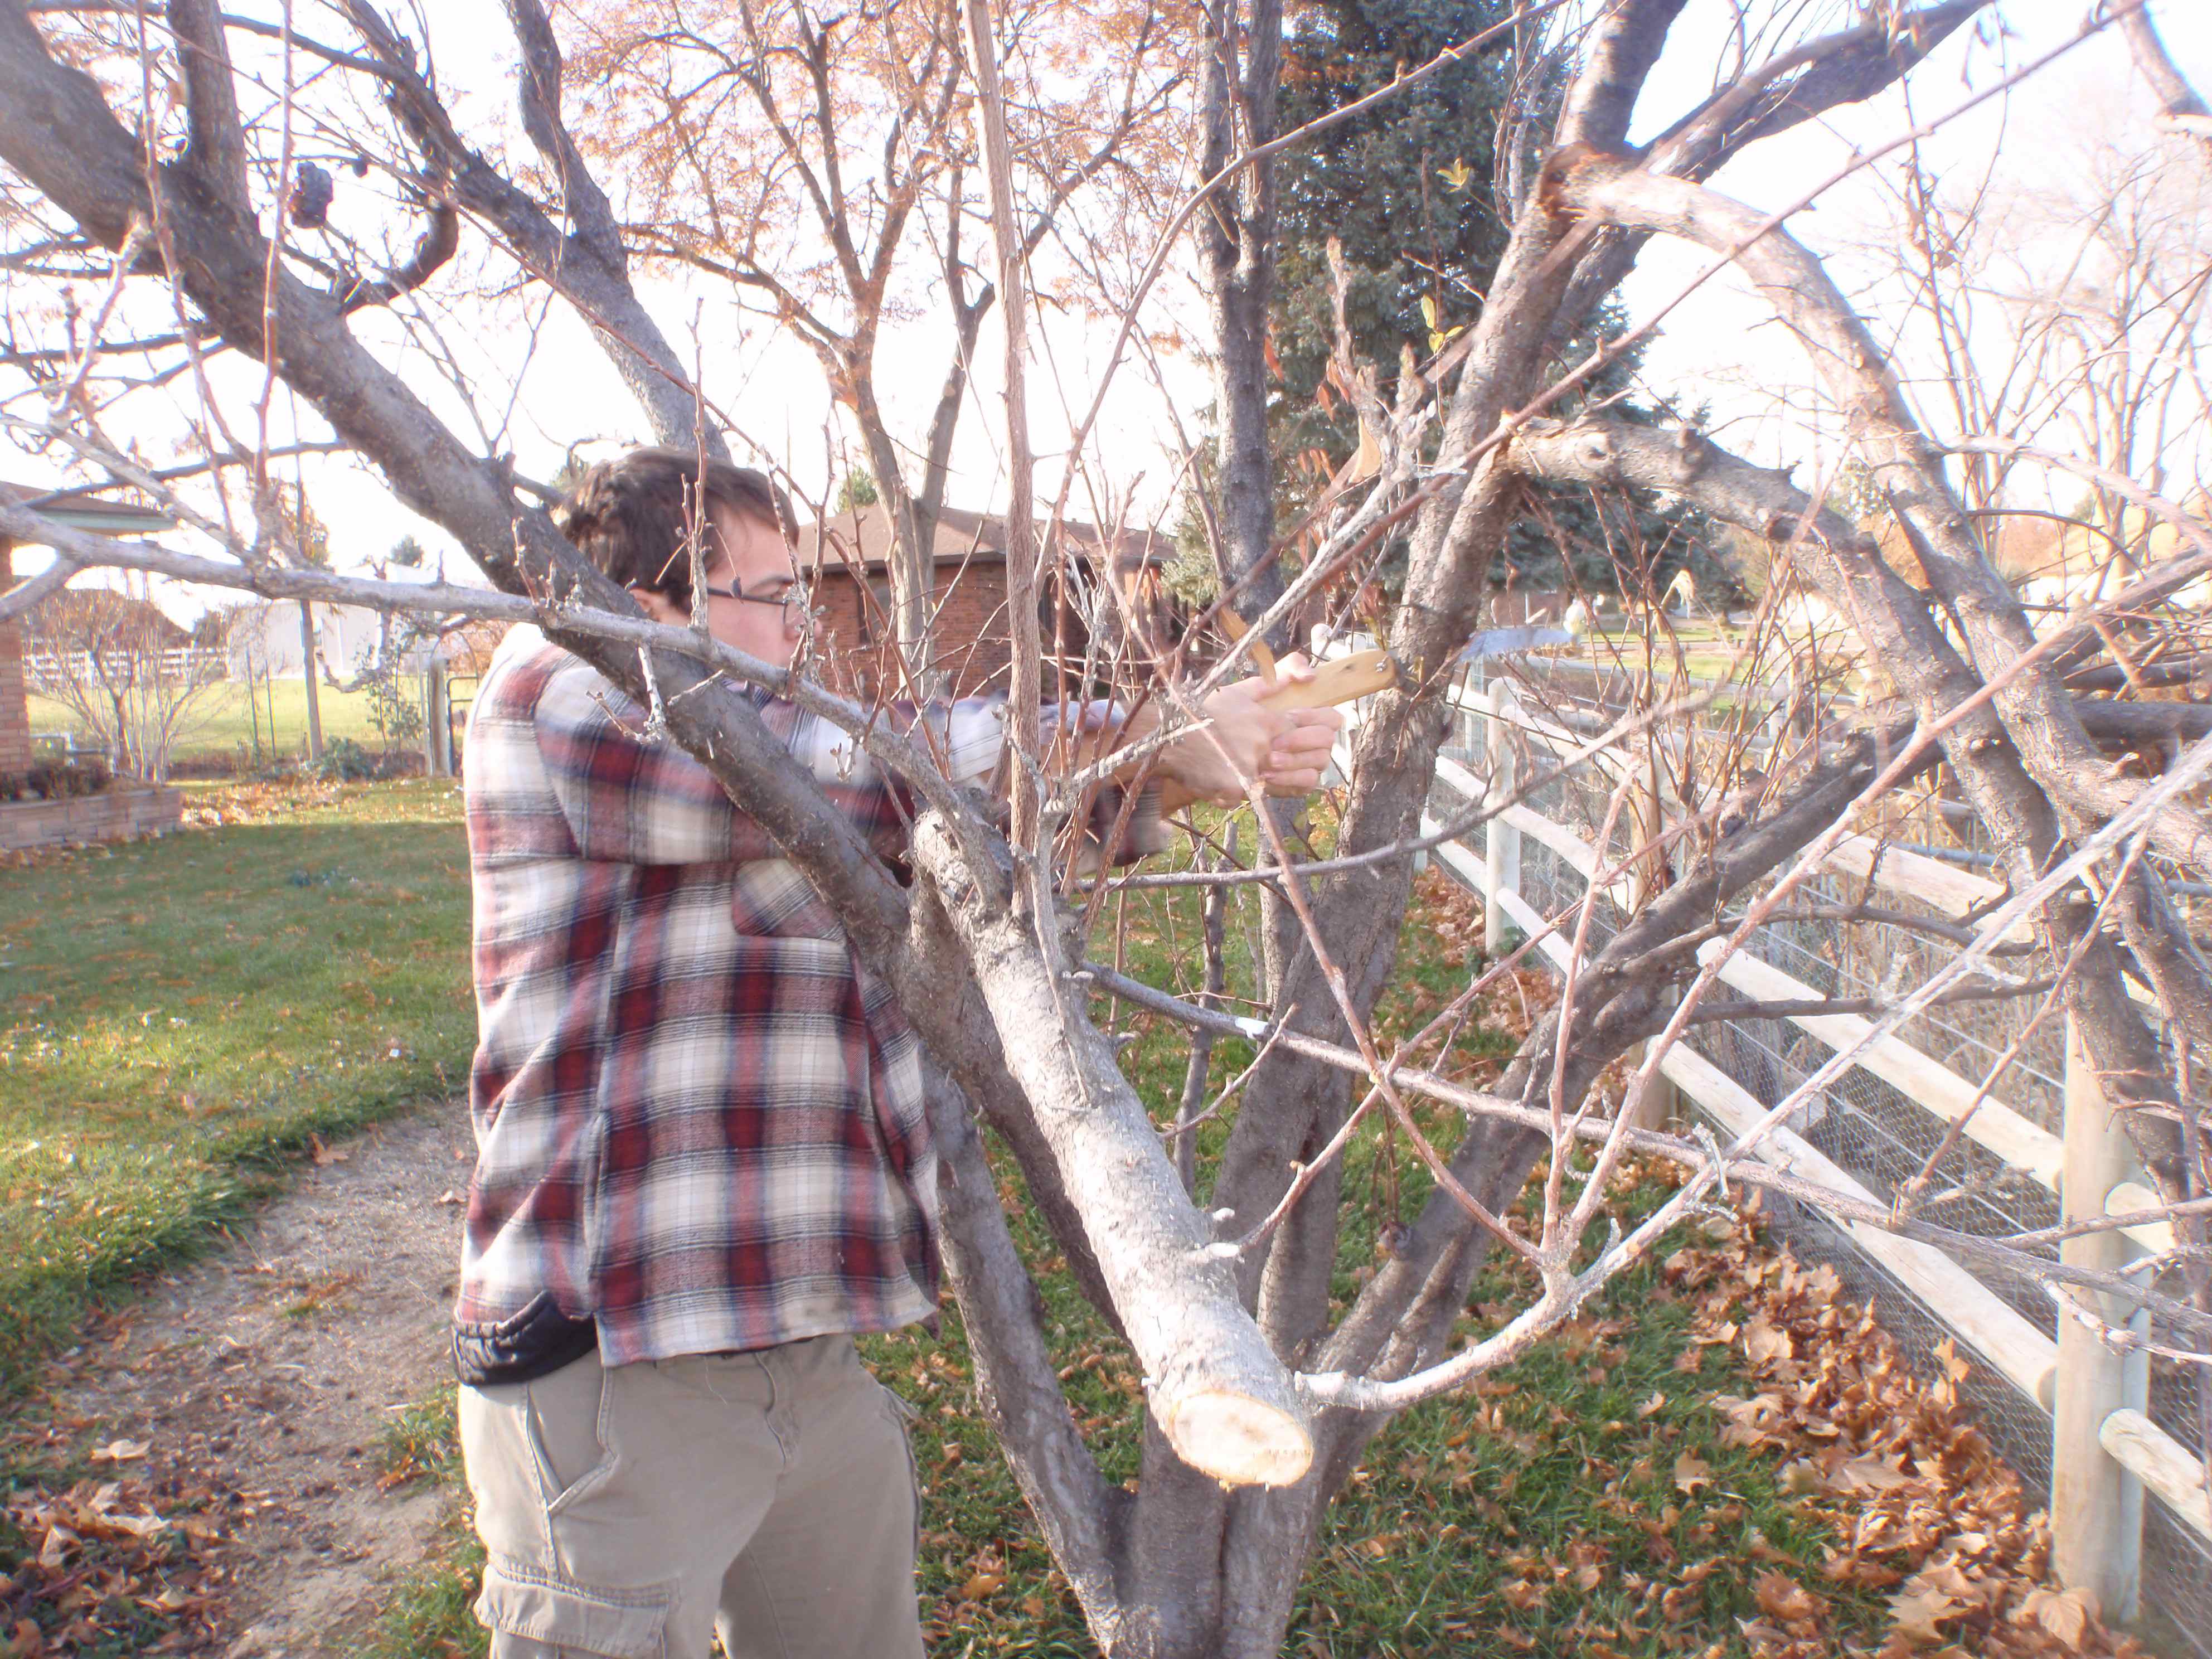 Pruning Somewhat Neglected Dormant Fruit Tree in Late Fall